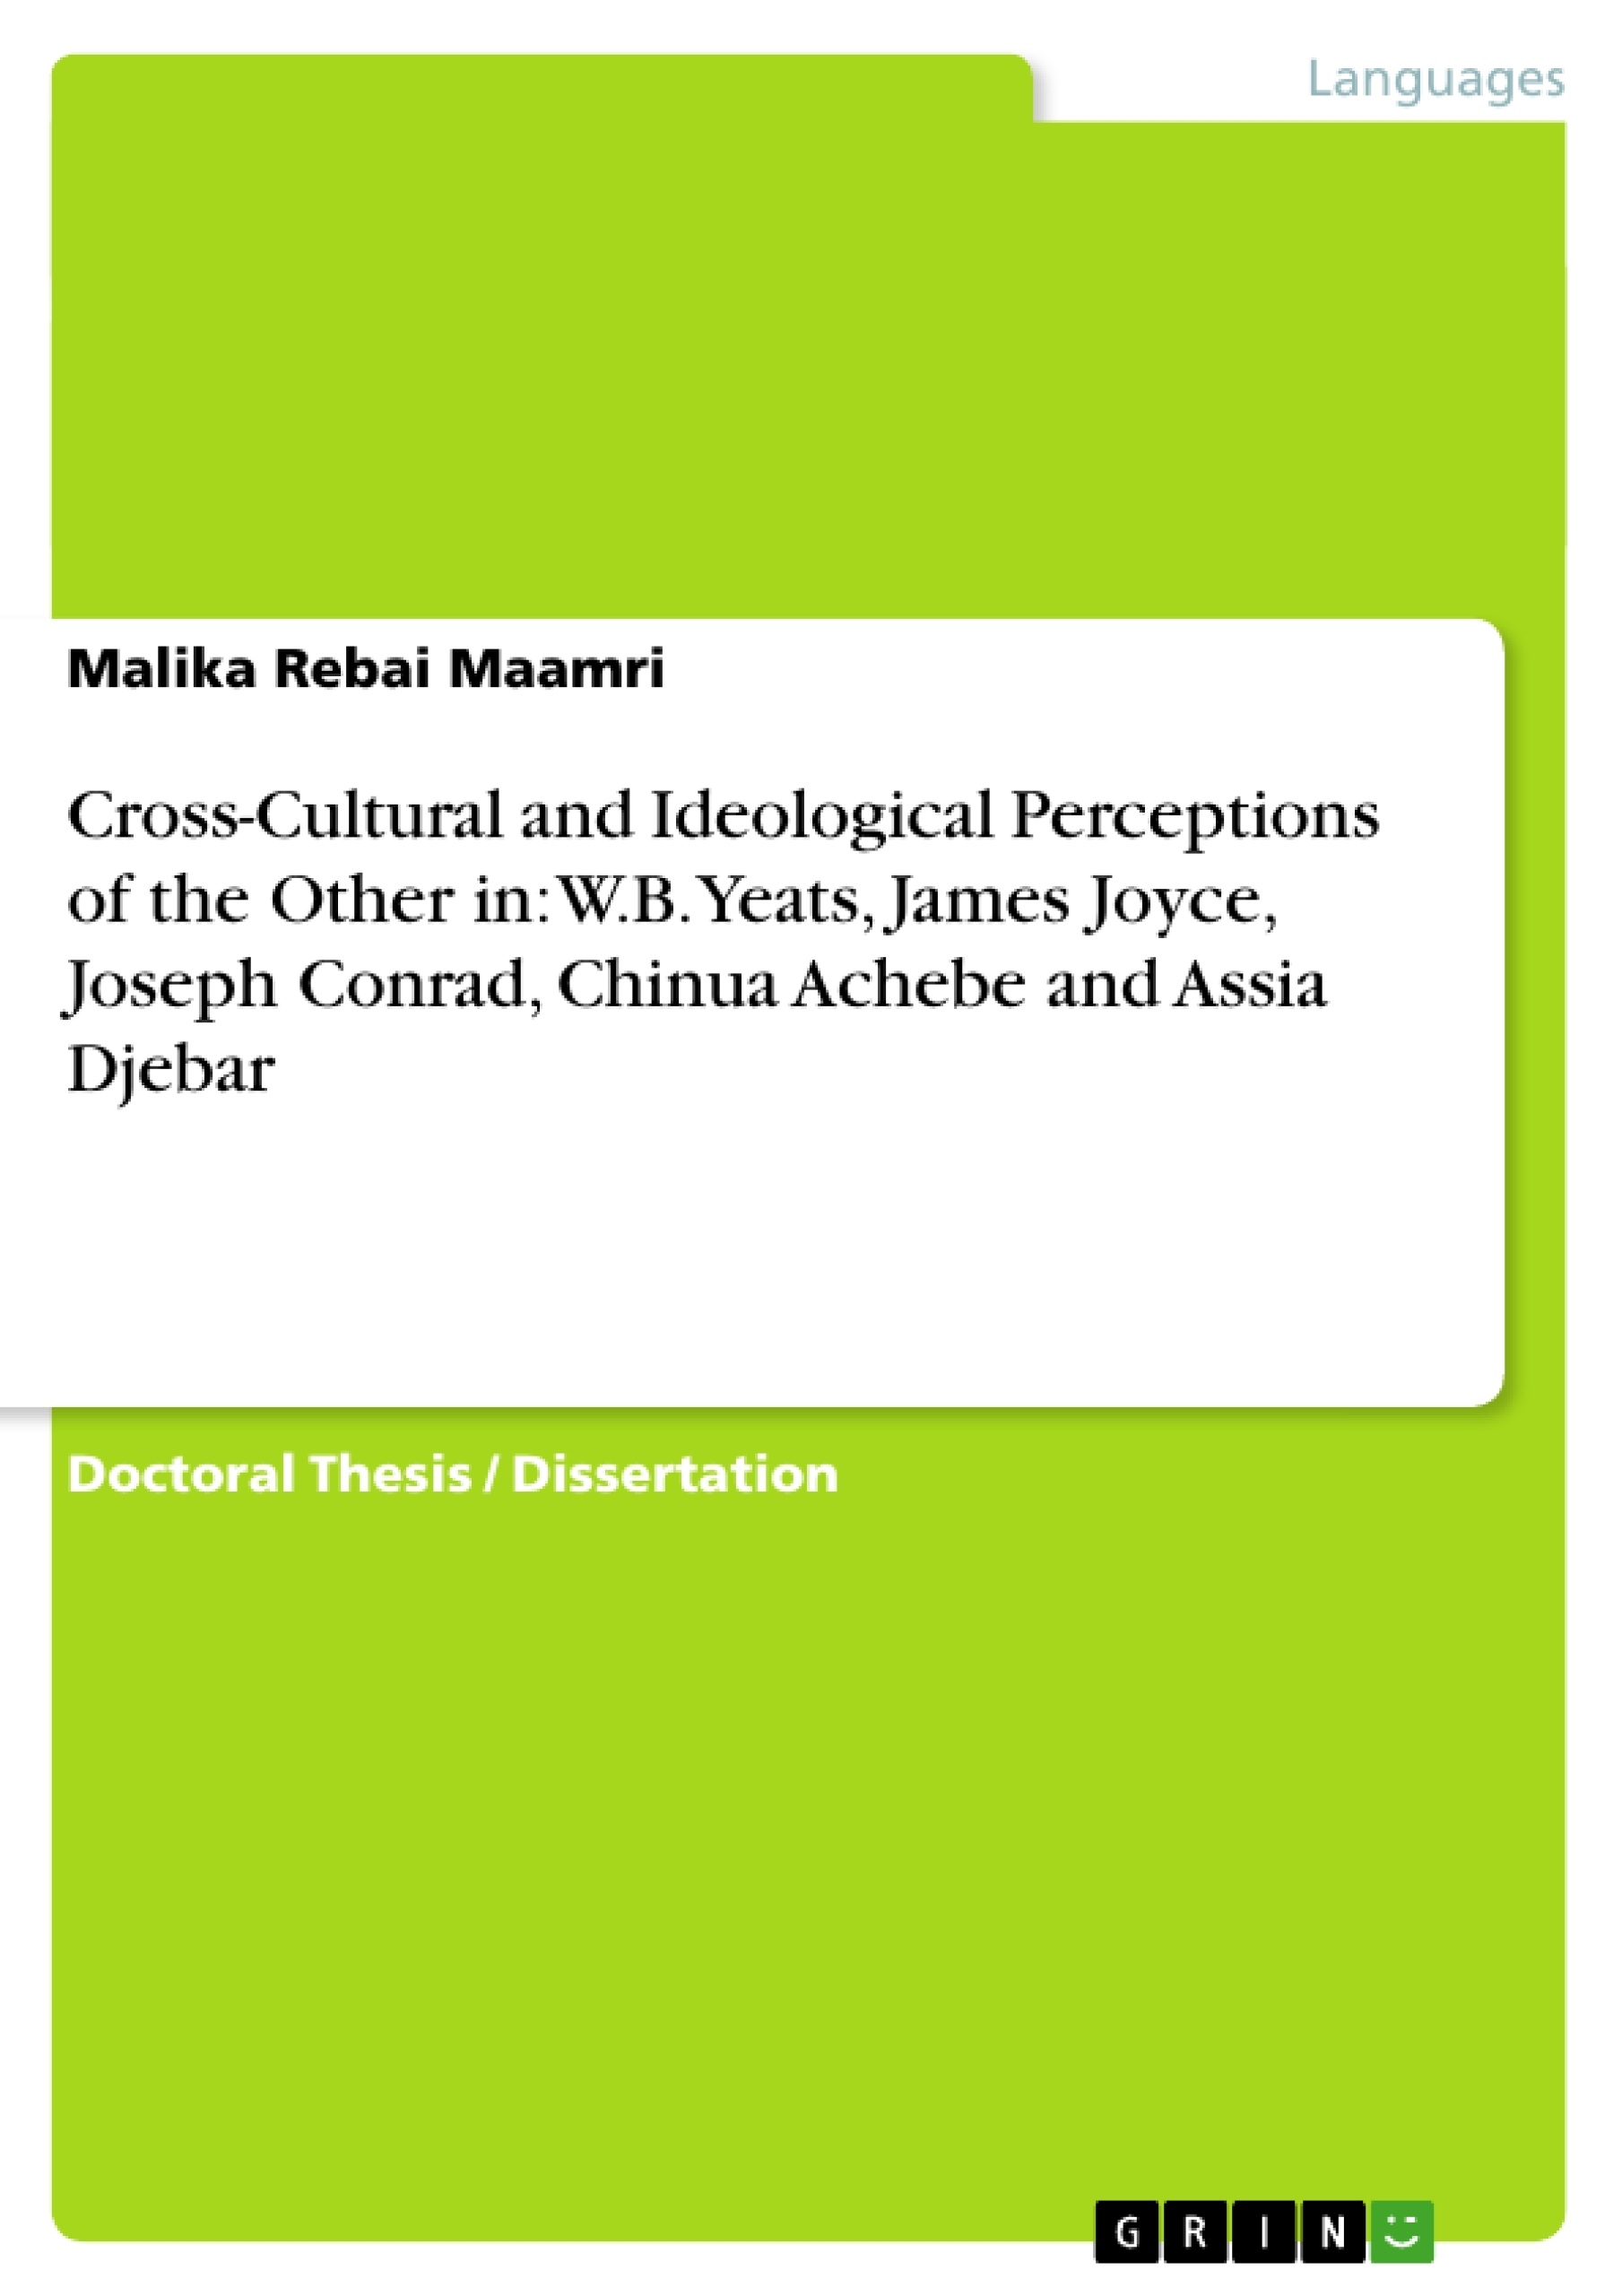 Title: Cross-Cultural and Ideological Perceptions of the Other in: W.B. Yeats, James Joyce, Joseph Conrad, Chinua Achebe and Assia Djebar